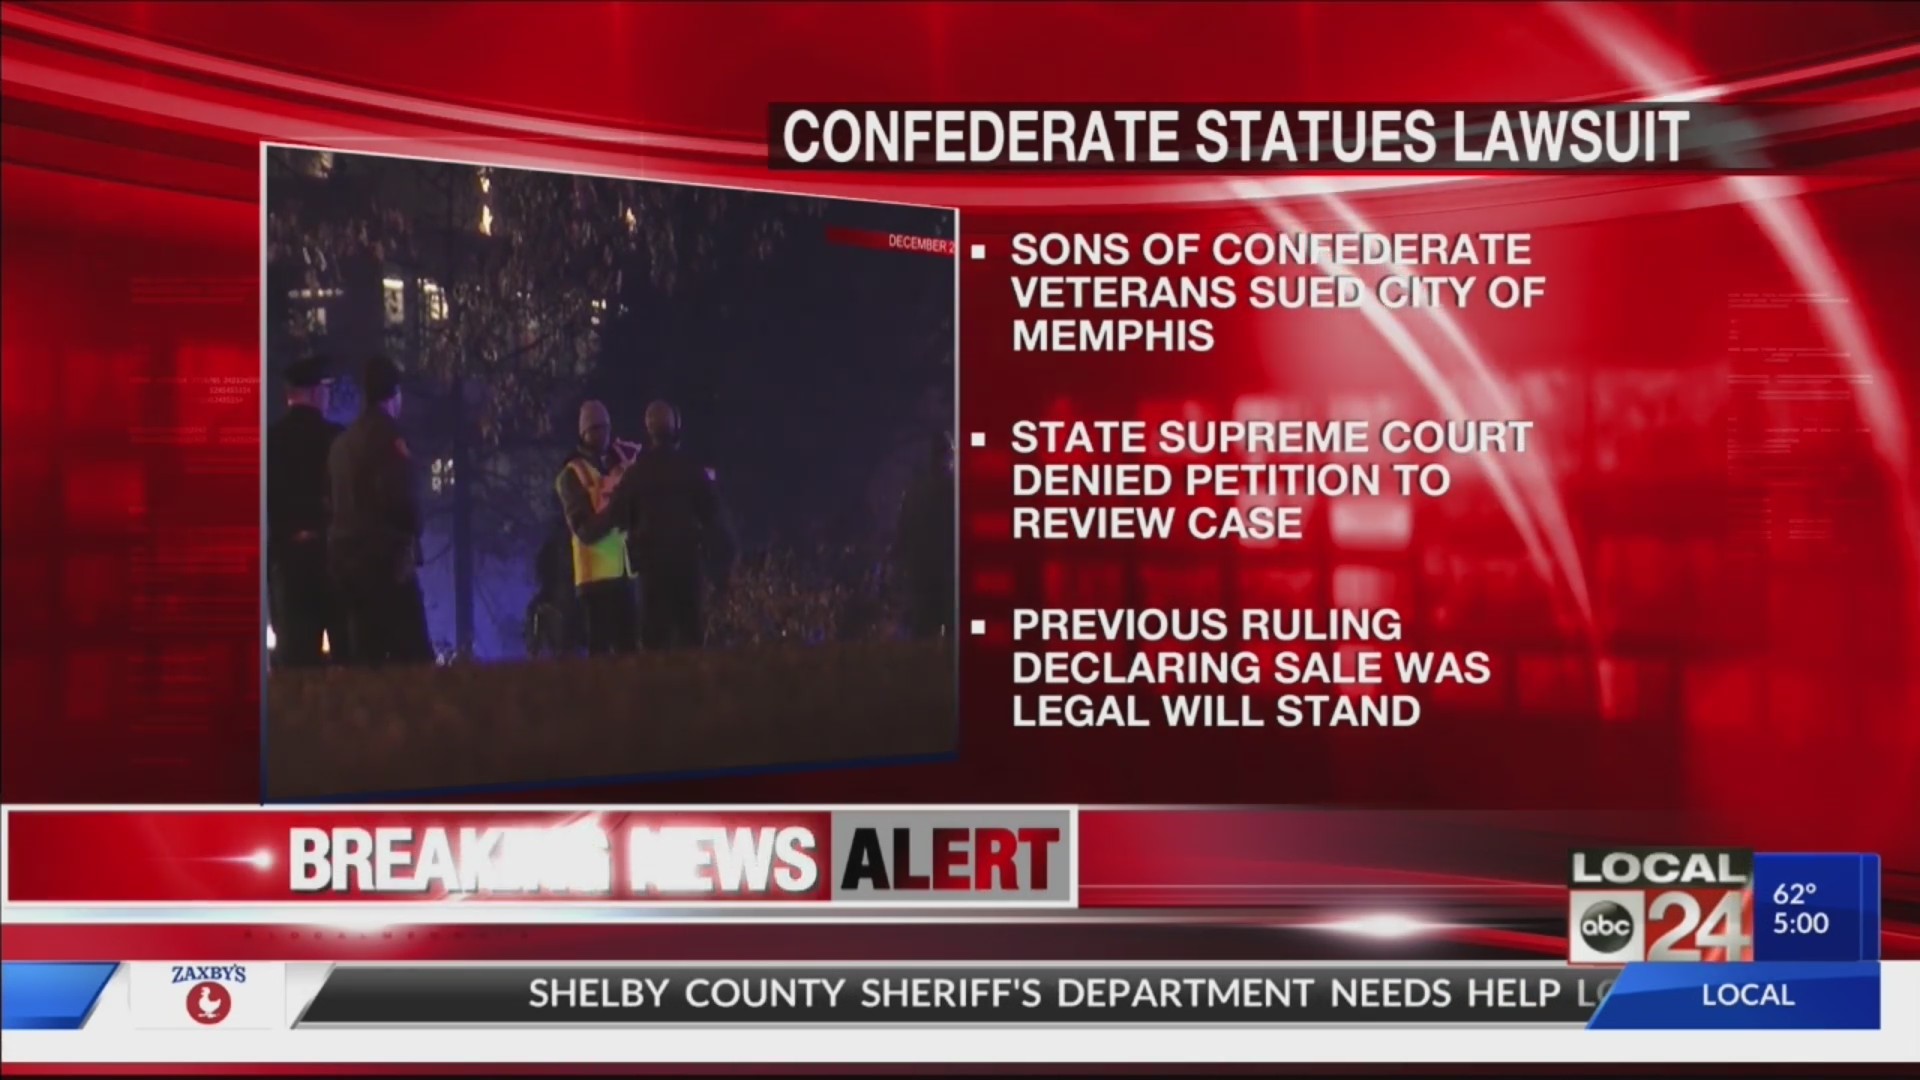 Tennessee Supreme Court denies petition to review lower court ruling dismissing lawsuit over Confederate statues in Memphis